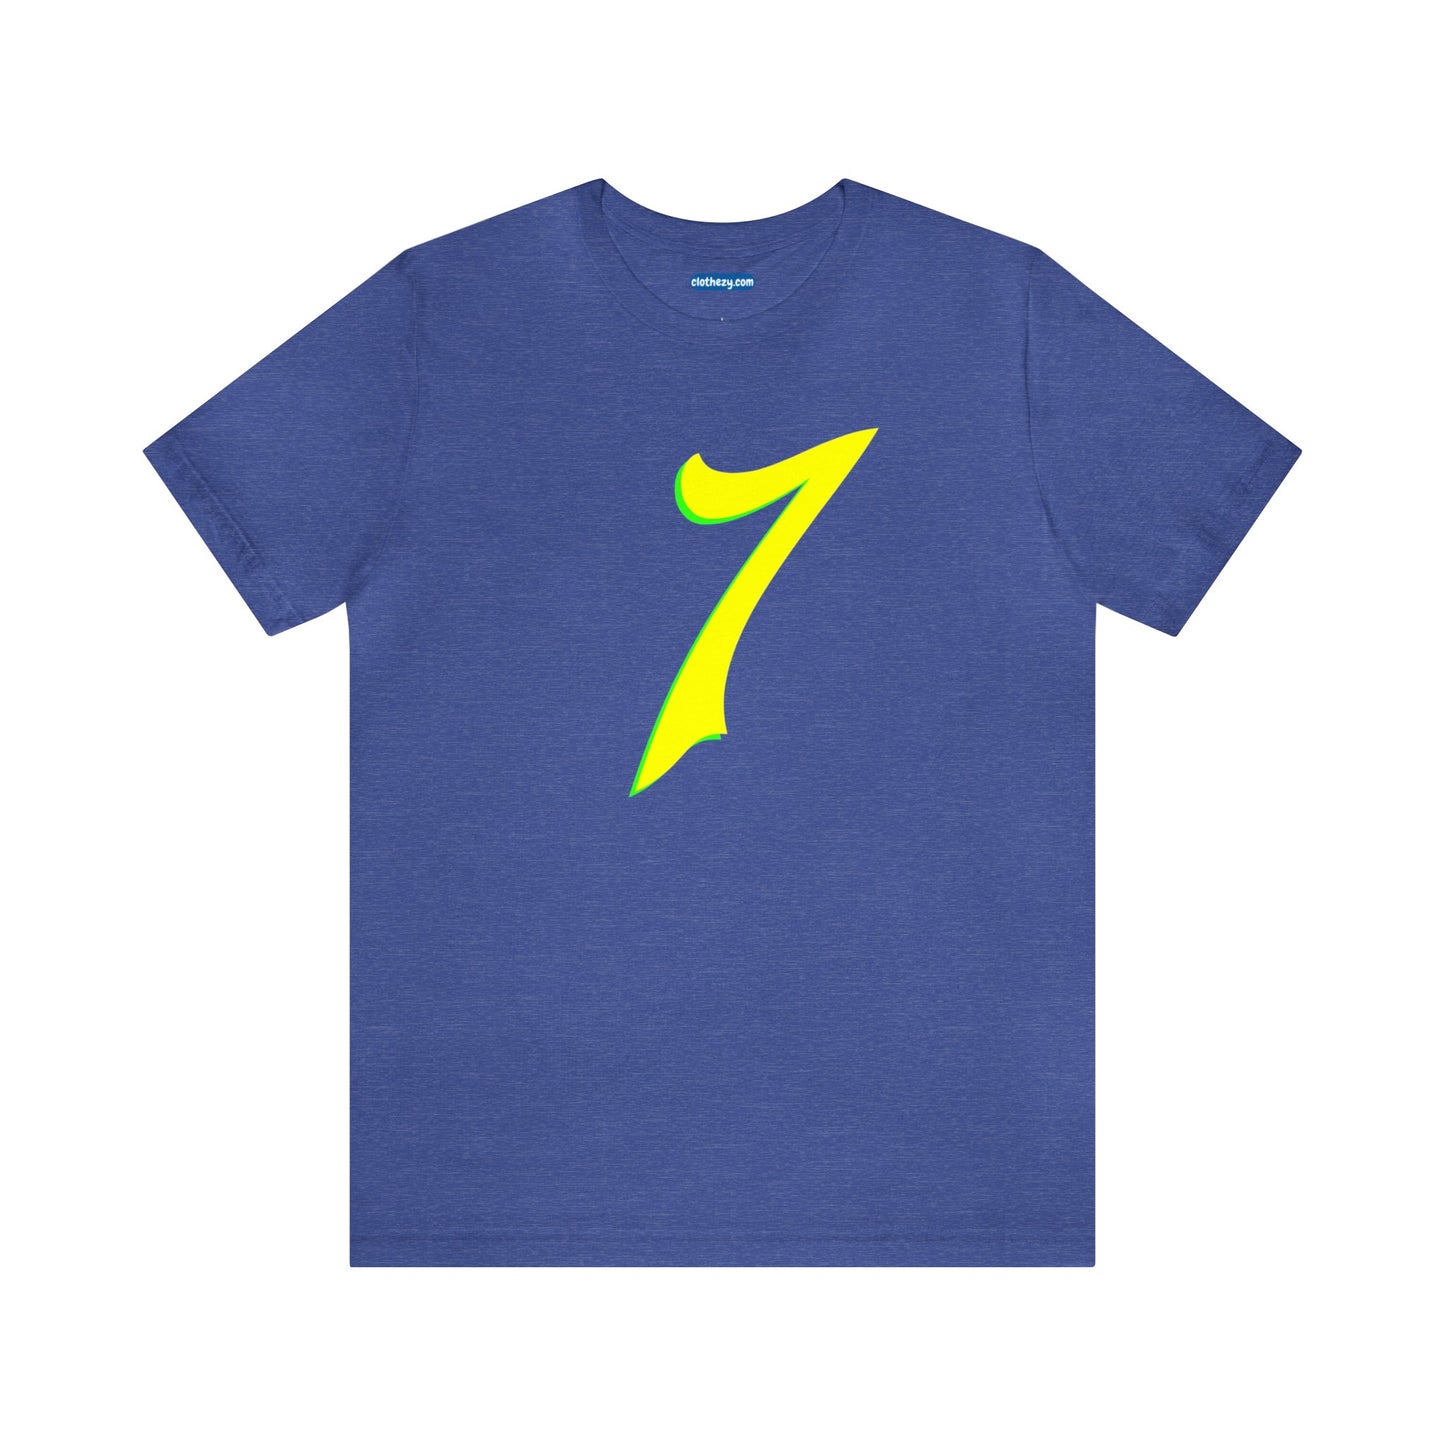 Number 7 Design - Soft Cotton Tee for birthdays and celebrations, Gift for friends and family, Multiple Options by clothezy.com in Royal Blue Heather Size Small - Buy Now